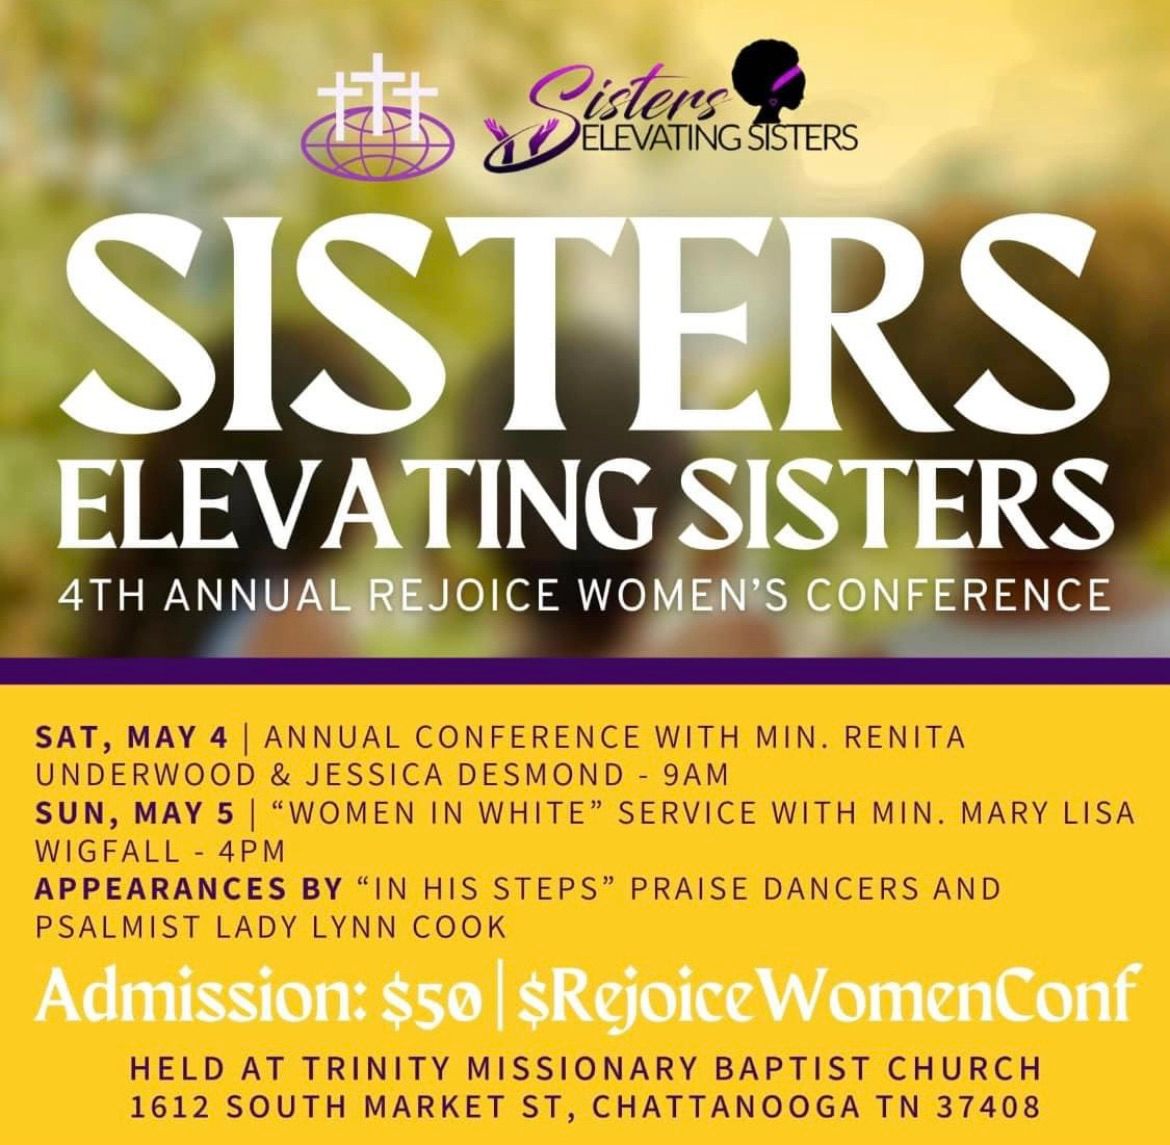 Rejoice Women's Conference ~ Theme: Sisters Elevating Sisters 